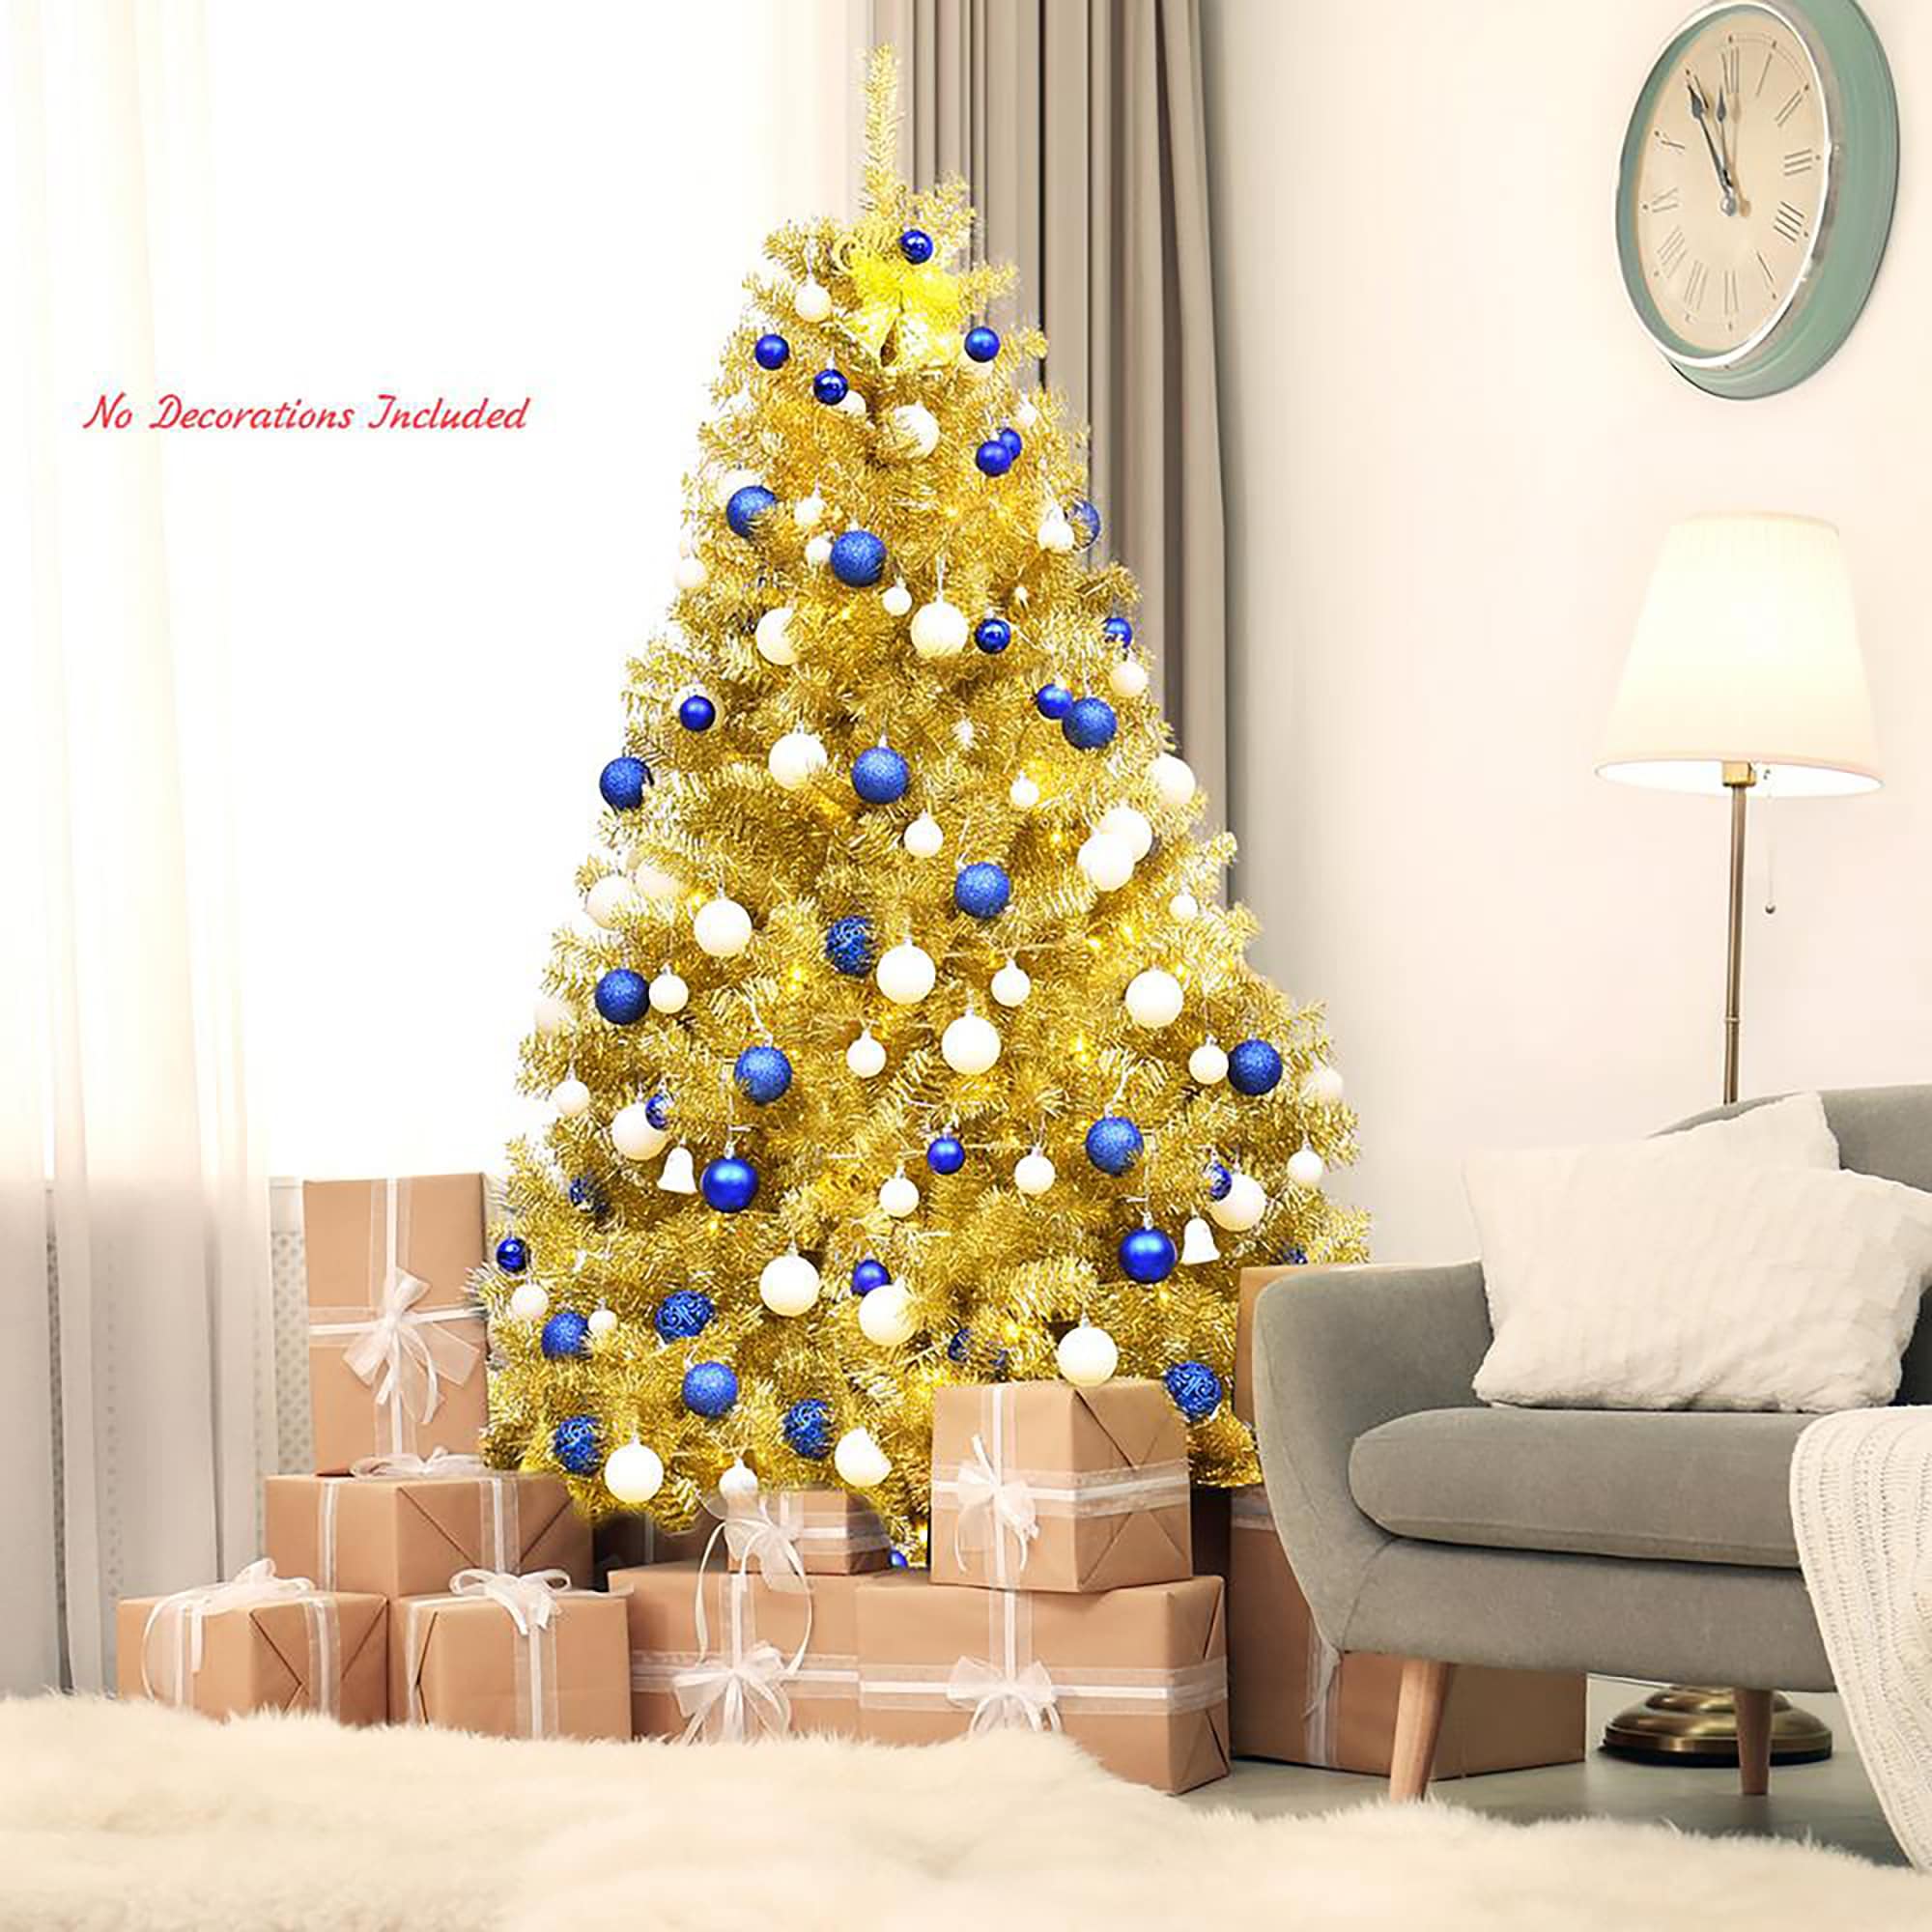 Gold Wire Loop Christmas Tree Set of 3